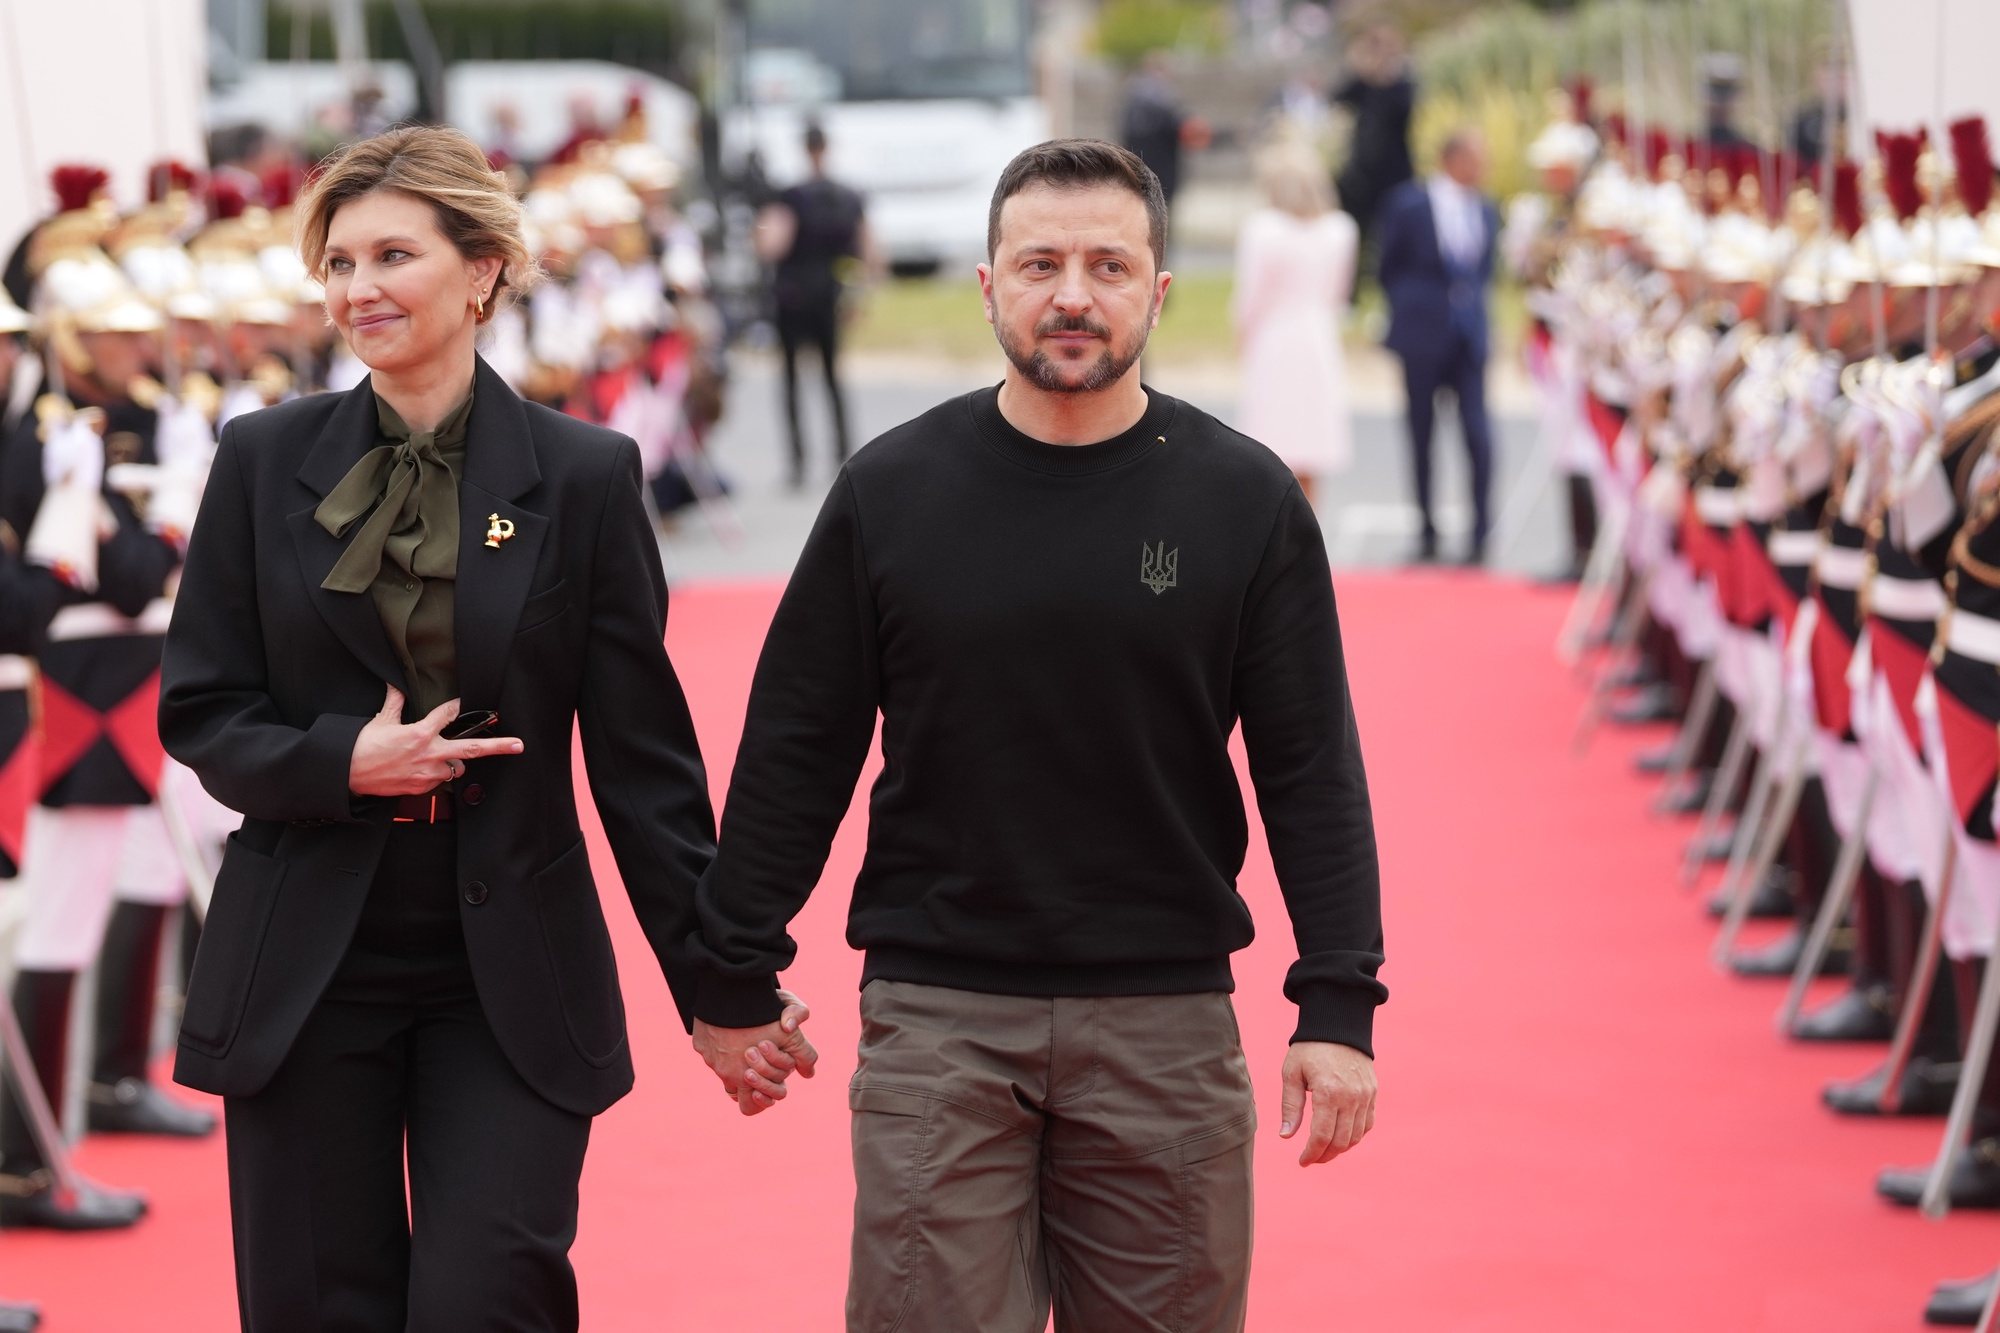 epa11393476 Ukrainian President Volodymyr Zelensky and his wife Olena Zelenska arrive at the international ceremony at Omaha Beach, Saint-Laurent-sur-Mer, France, 06 June 2024. More than 160.000 Western allied troops landed on beaches in Normandy on 6 June 1944 launching the liberation of Western Europe from Nazi occupation during World War II.  EPA/Virginia Mayo / POOL MAXPPP OUT